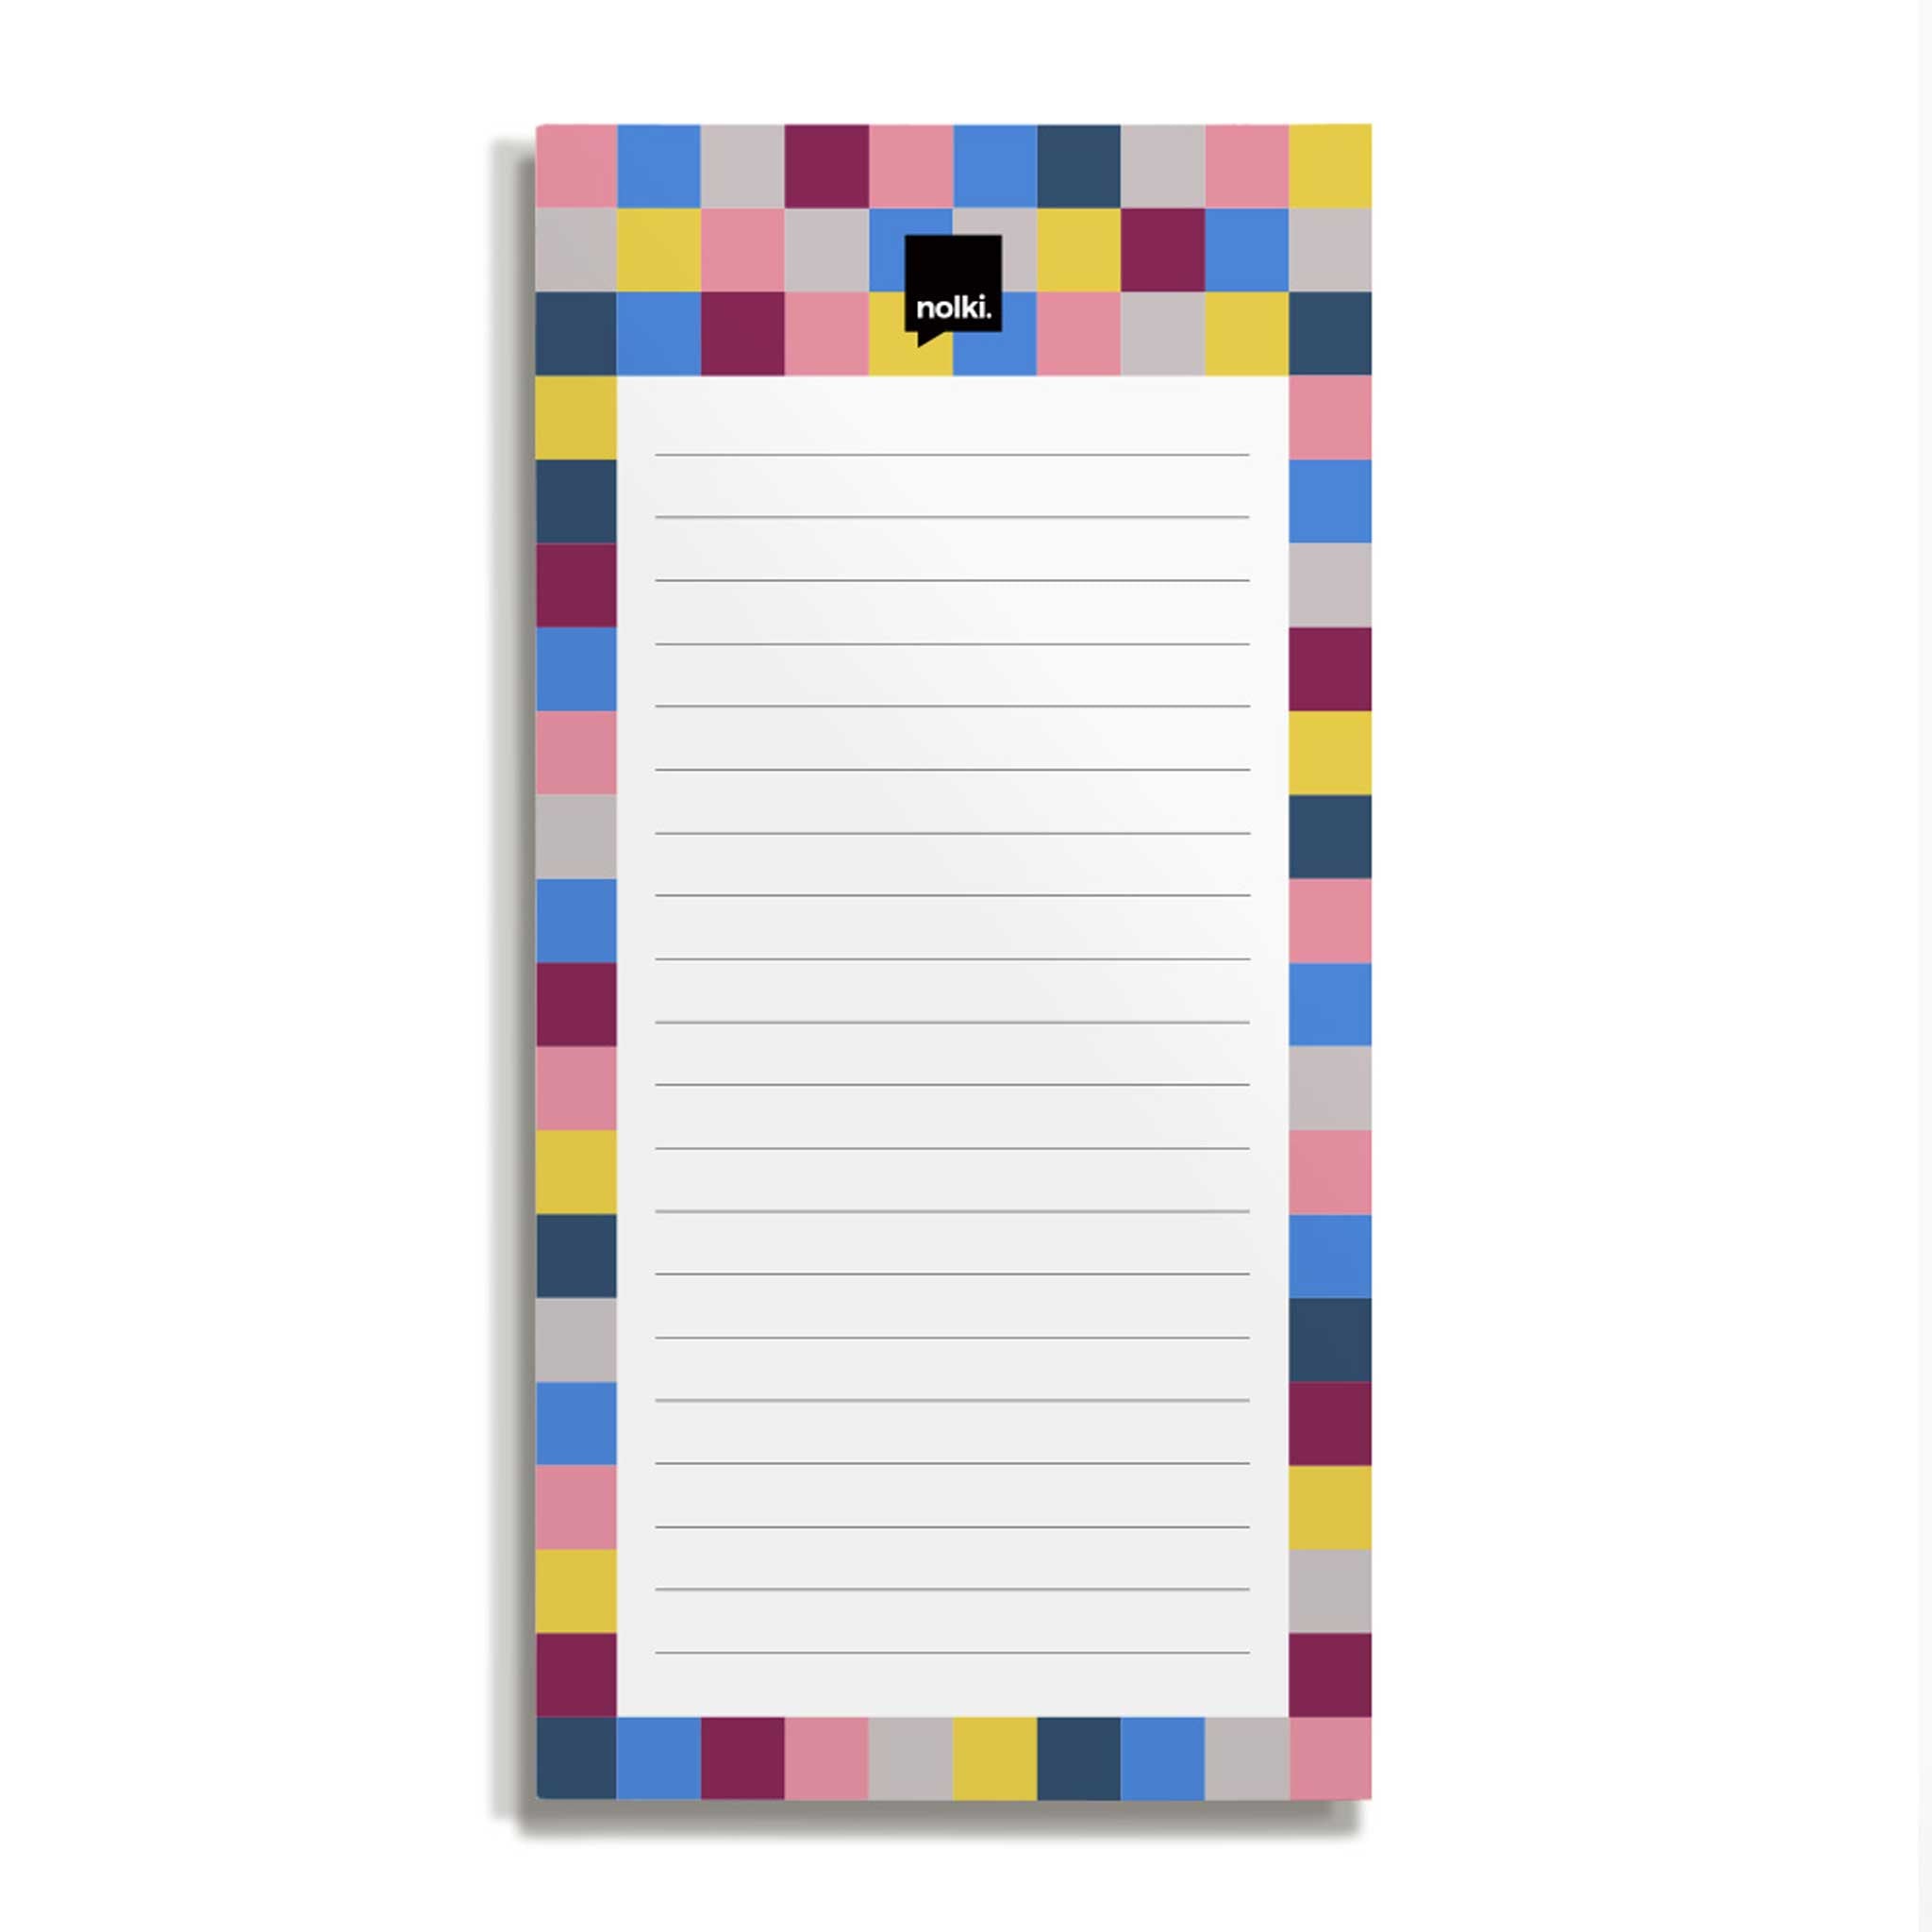 DO THIS, DO THAT Pixel | NOTEPAD | 100 pages | nolki